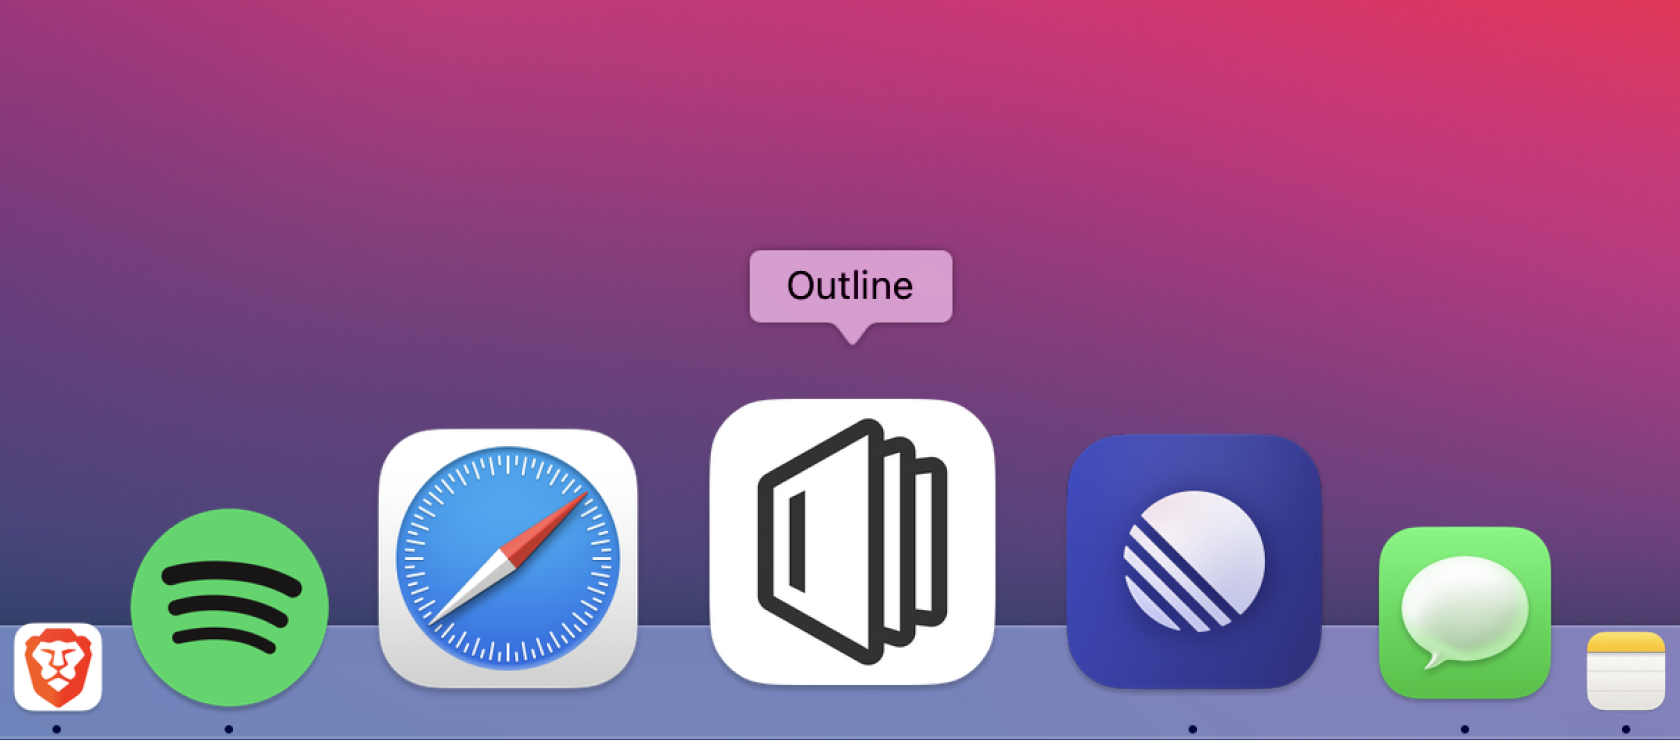 Outline on macOS